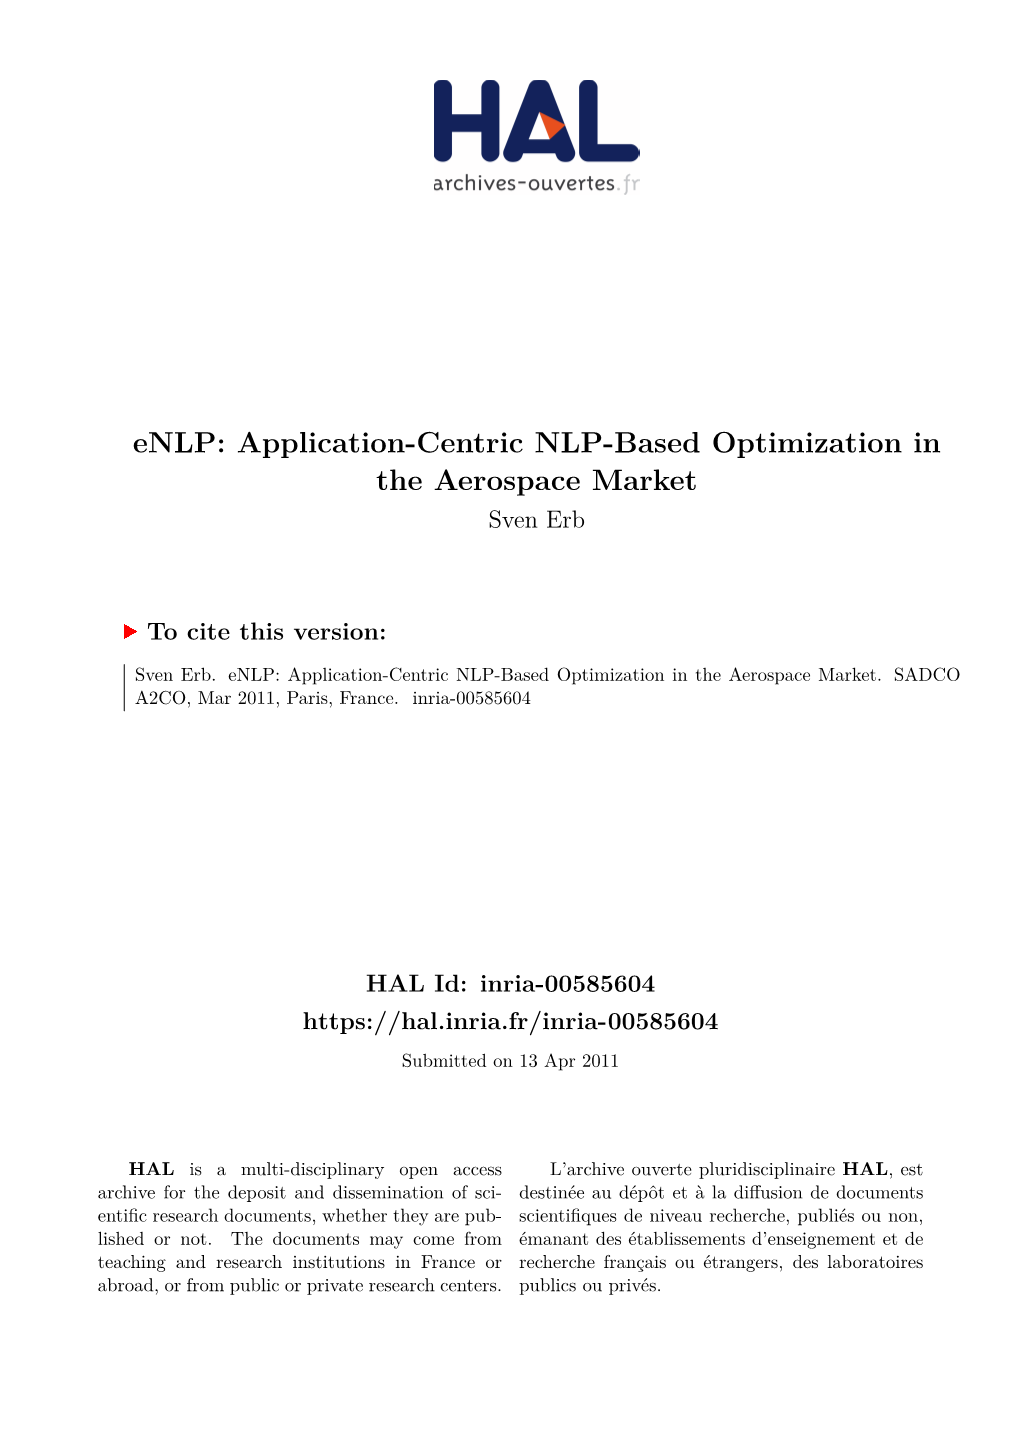 Application-Centric NLP-Based Optimization in the Aerospace Market Sven Erb